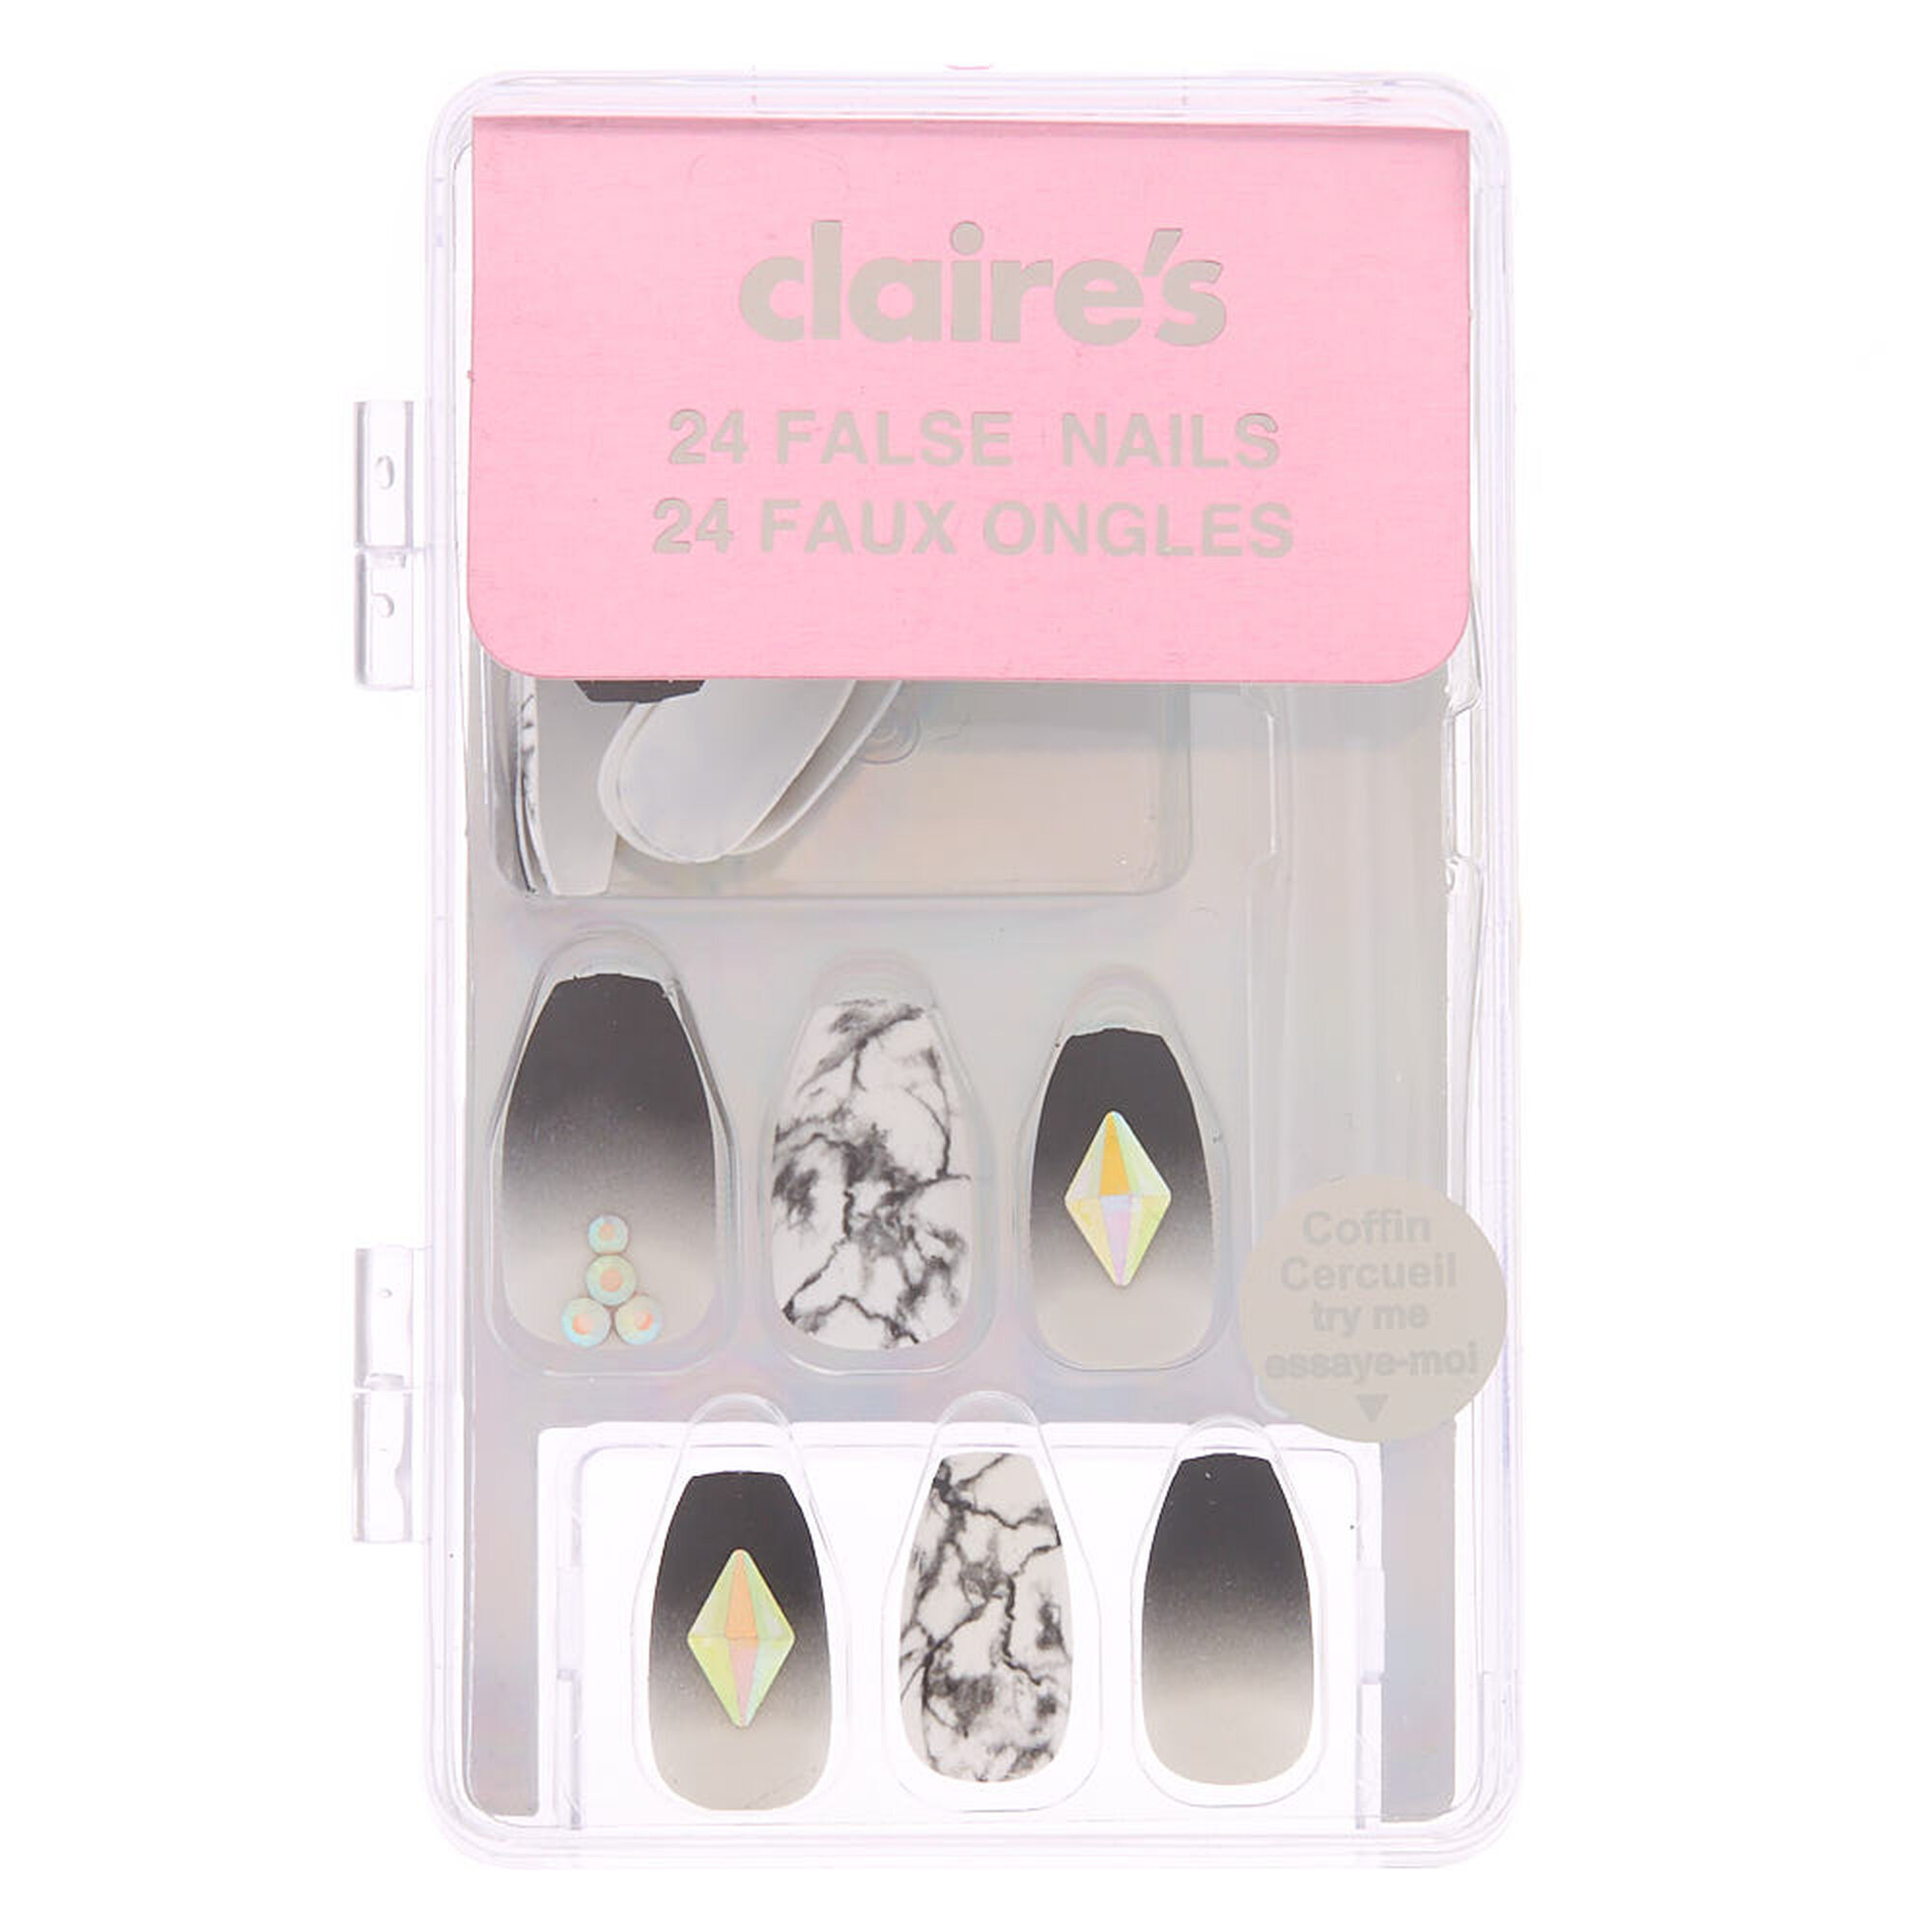 View Claires Ombre Marble Bling Coffin Faux Nail Set Grey 24 Pack Black information